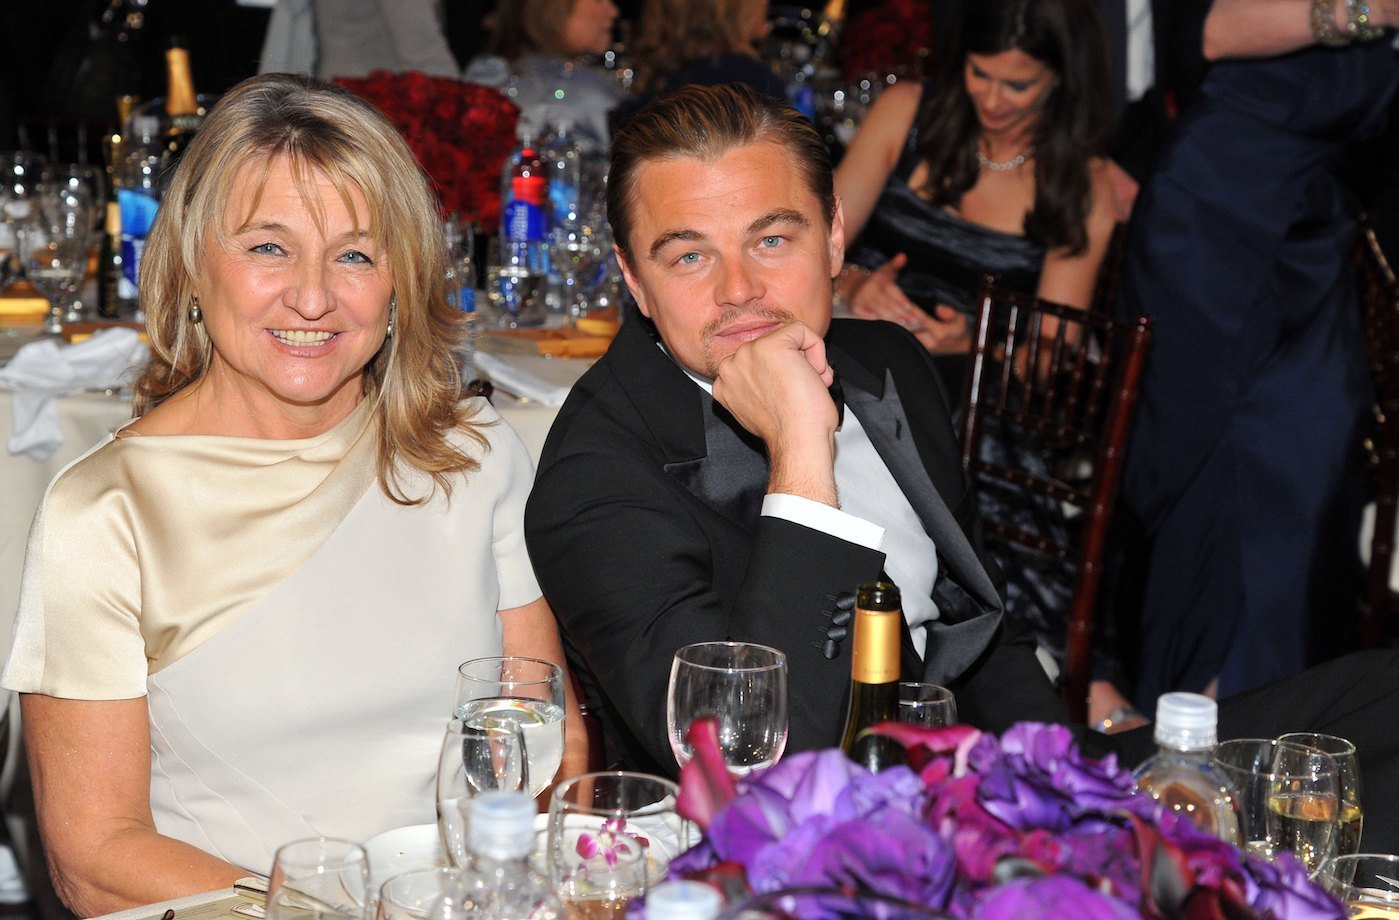 Leonardo DiCaprio sits at a table next to his mother, Irmelin Indenbirken, at the 2012 Golden Globes